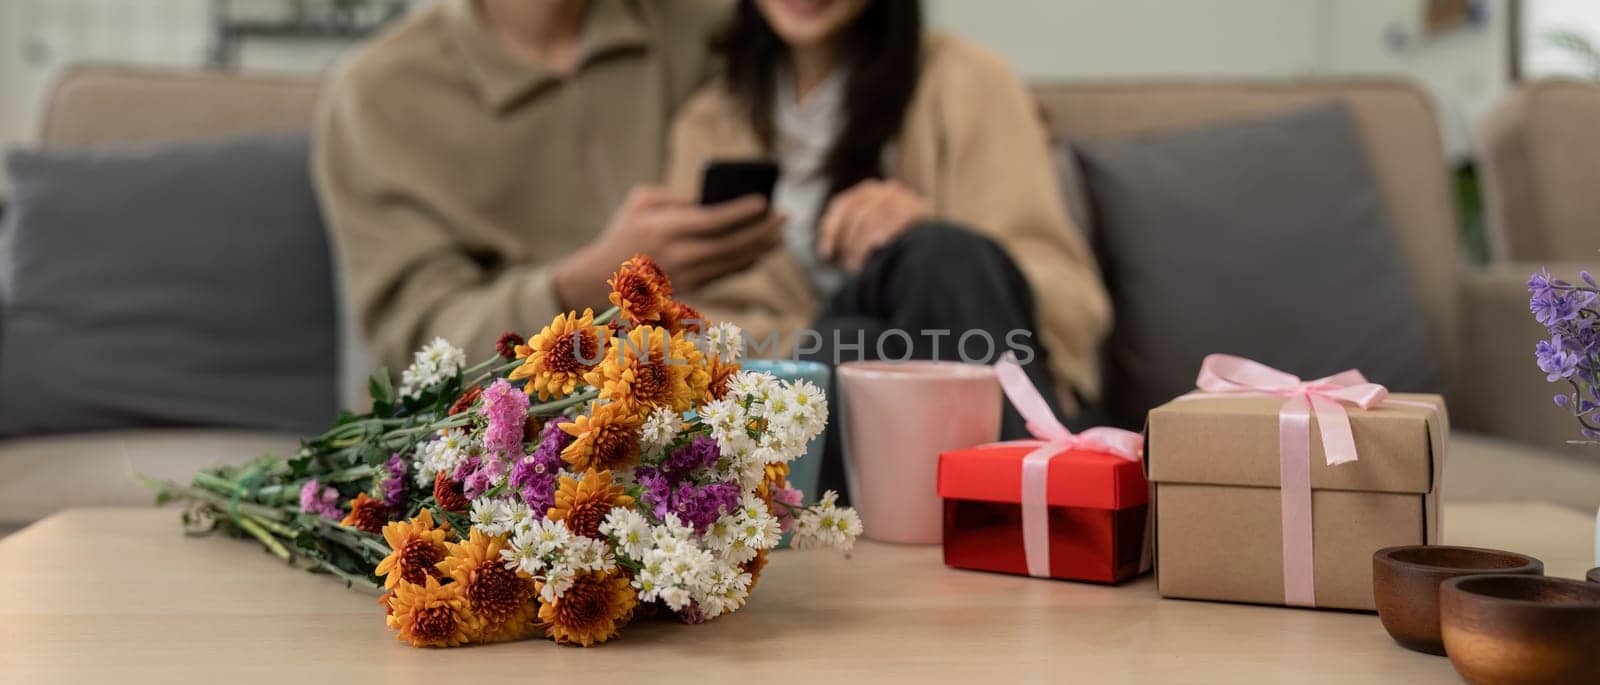 Romantic young asian couple embracing with holding flowers and smiling in living room at home. fall in love. Valentine concept.